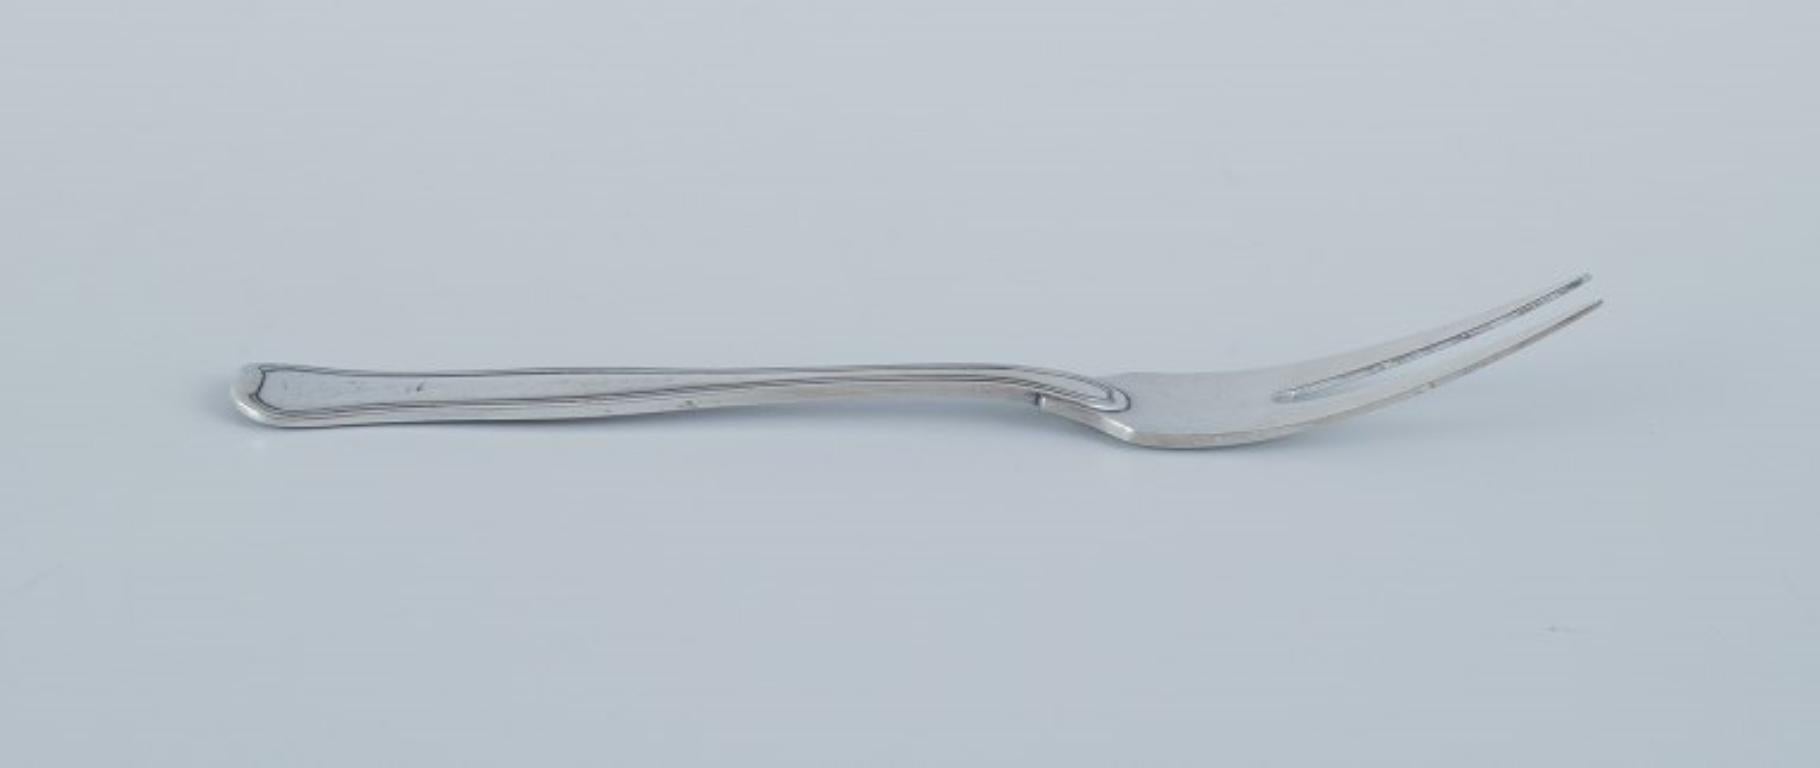 Georg Jensen Old Danish, cold meat fork in sterling silver.
Stamped with post 1944 hallmark.
In excellent condition.
Dimensions: L 16.4 cm.
